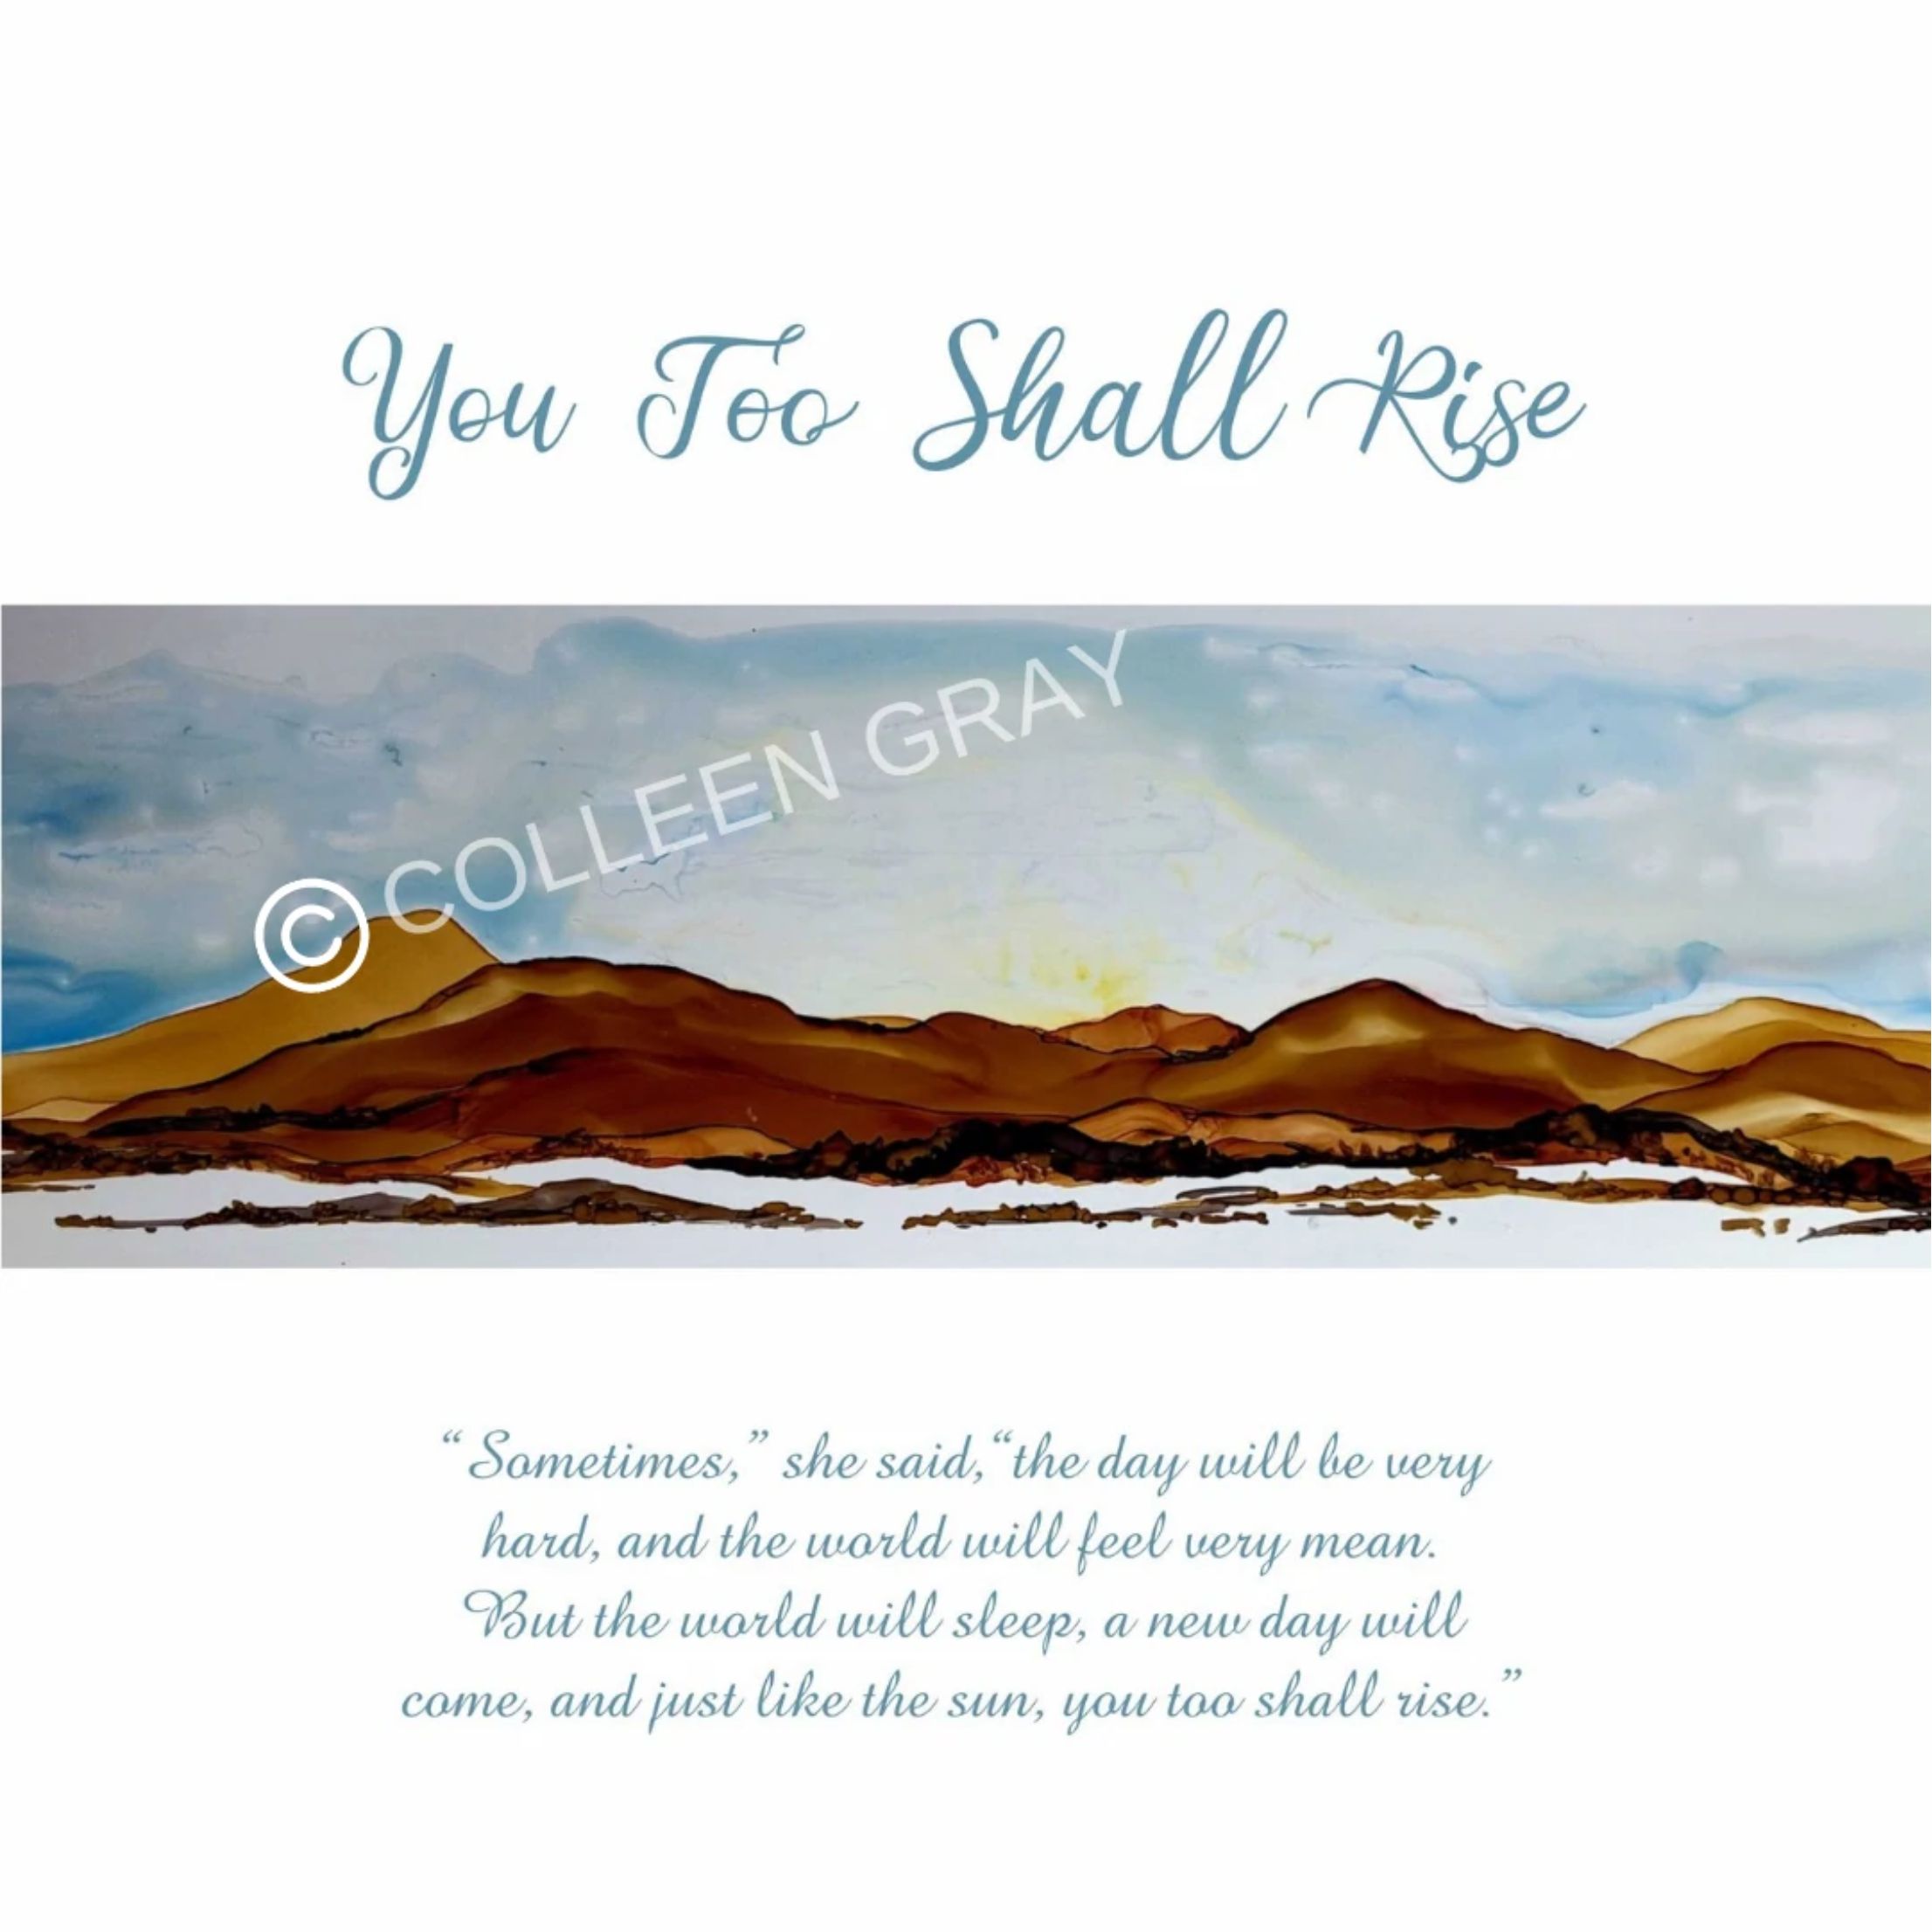 Above the image in scripted text is the phrase, "You too shall rise". The image is a low mountain range with a soft light sunrise, there is snow on the ground at the foot of the mountains. The text beneath the image reads, “Sometimes,” she said,“the day will be very hard, and the world will feel very mean. But the world will sleep, a new day will come, and just like the sun, you too shall rise."